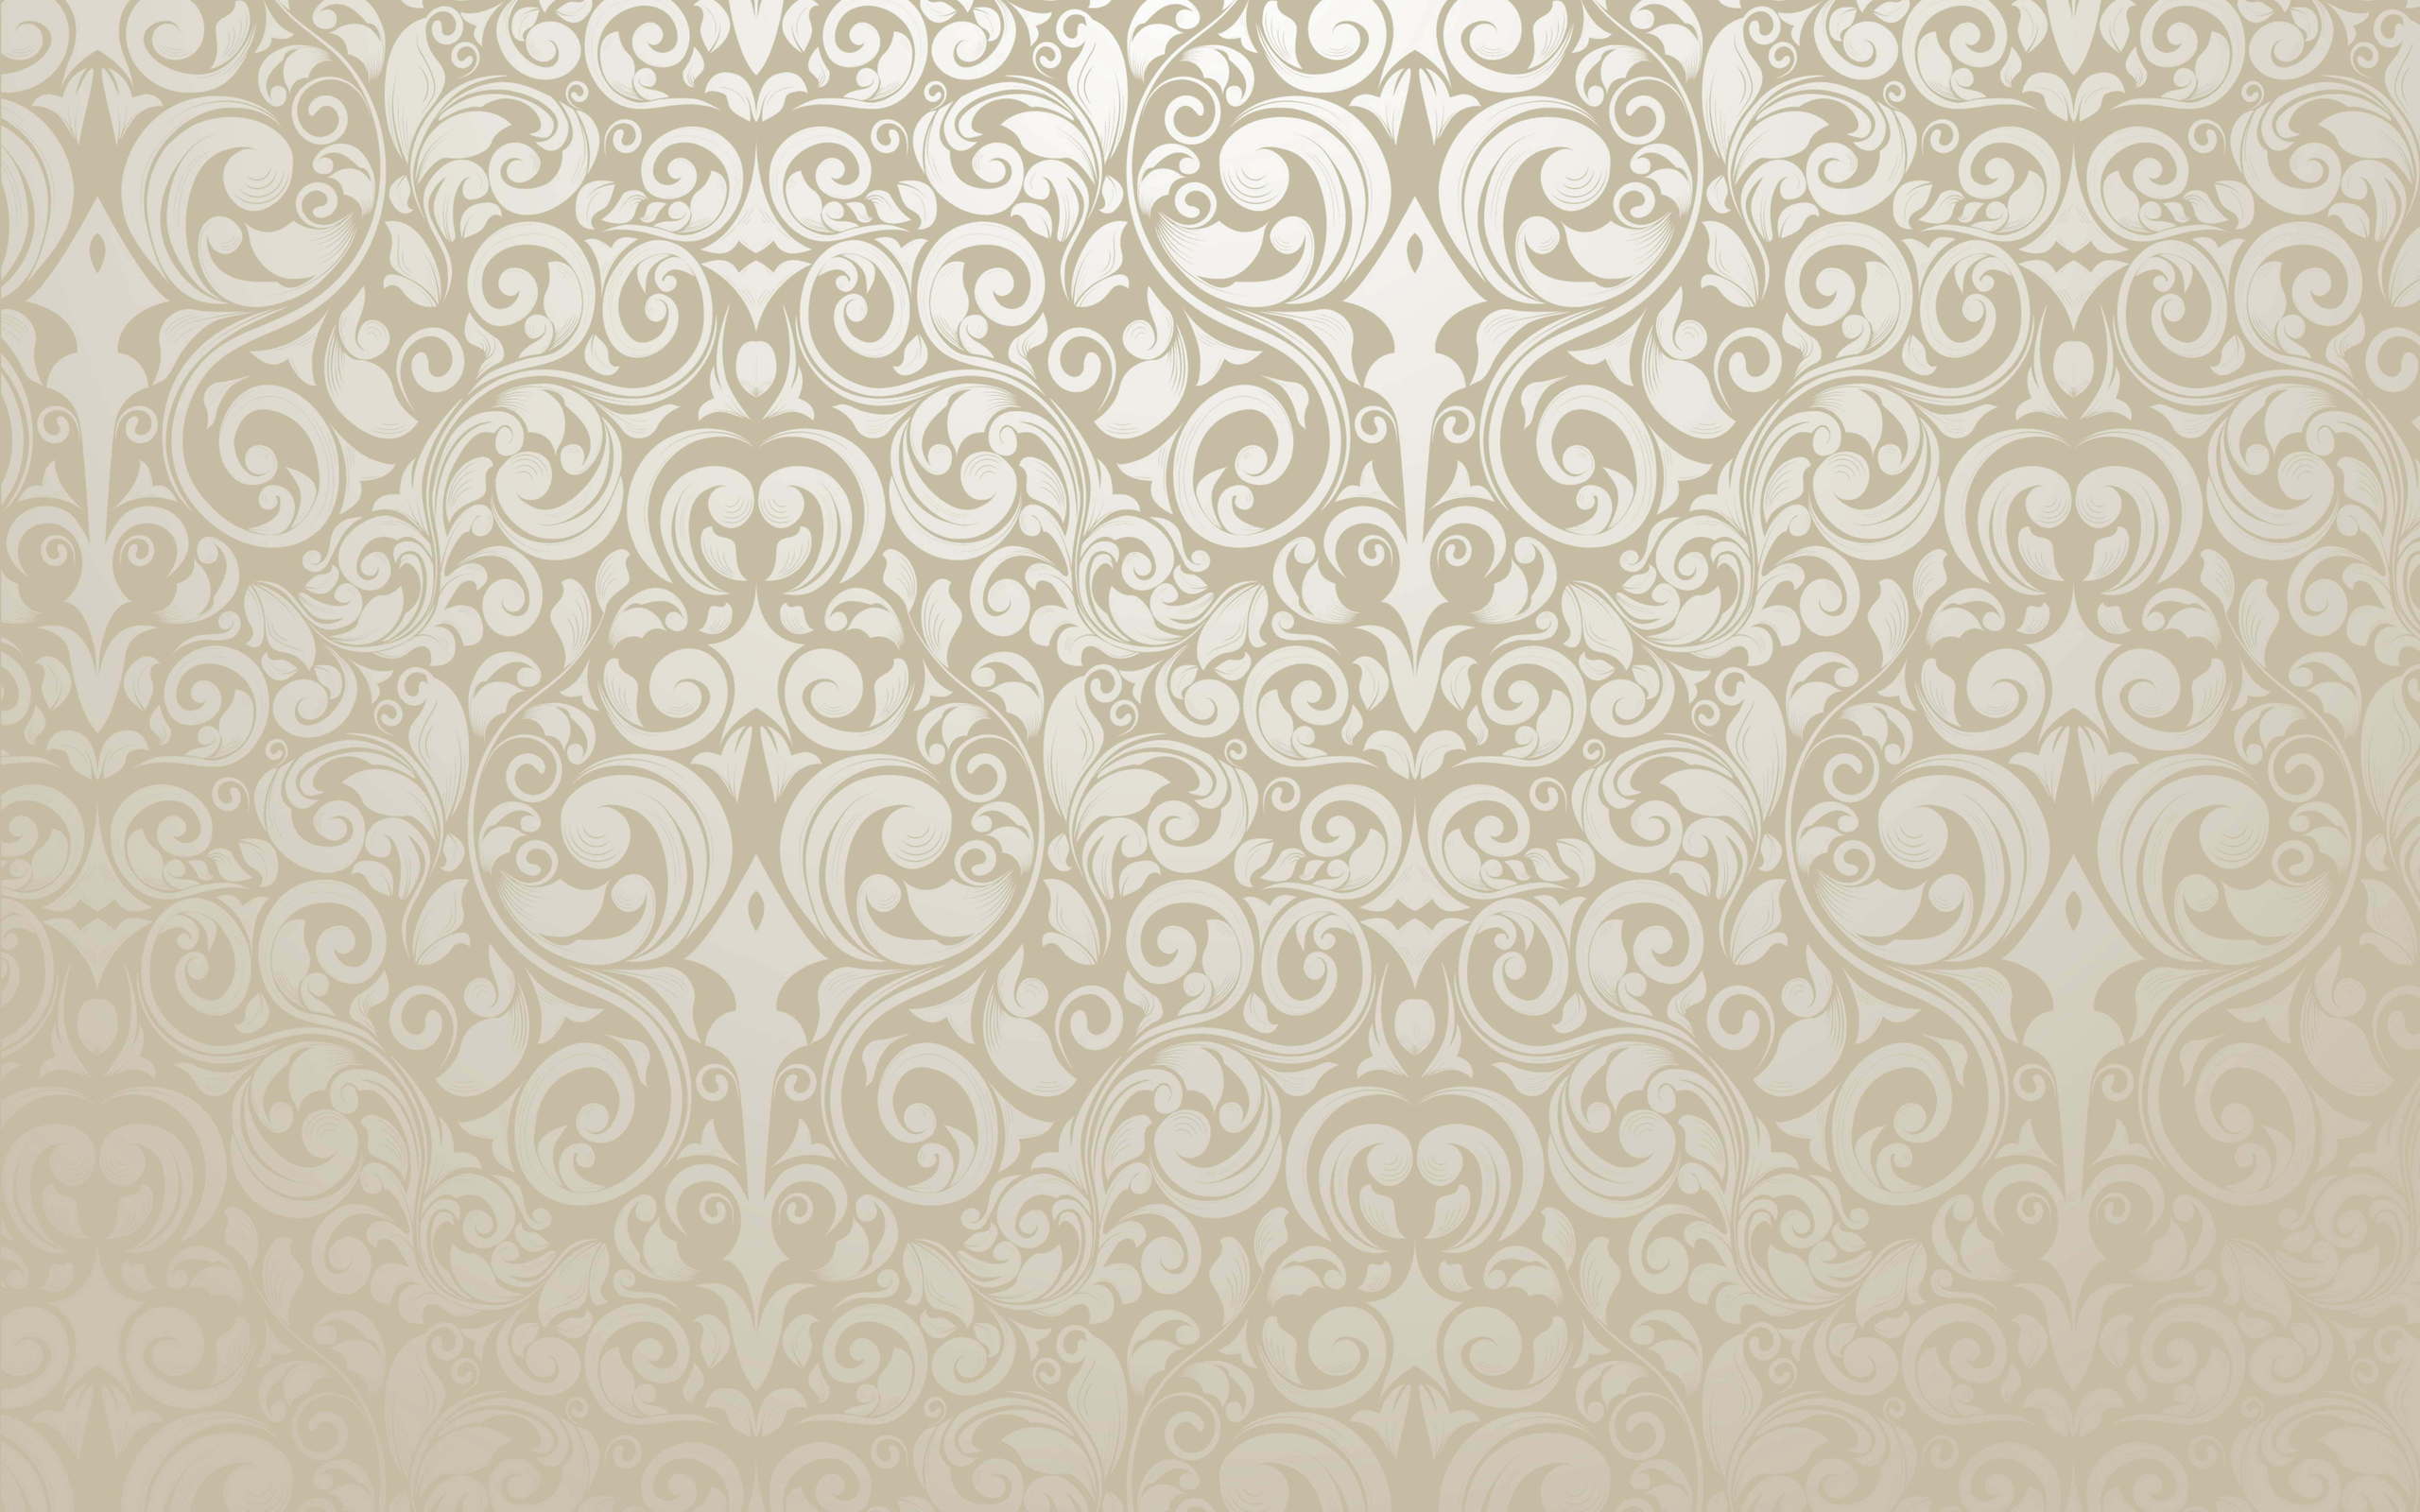 HD Wallpaper In Gold Color For Card Design